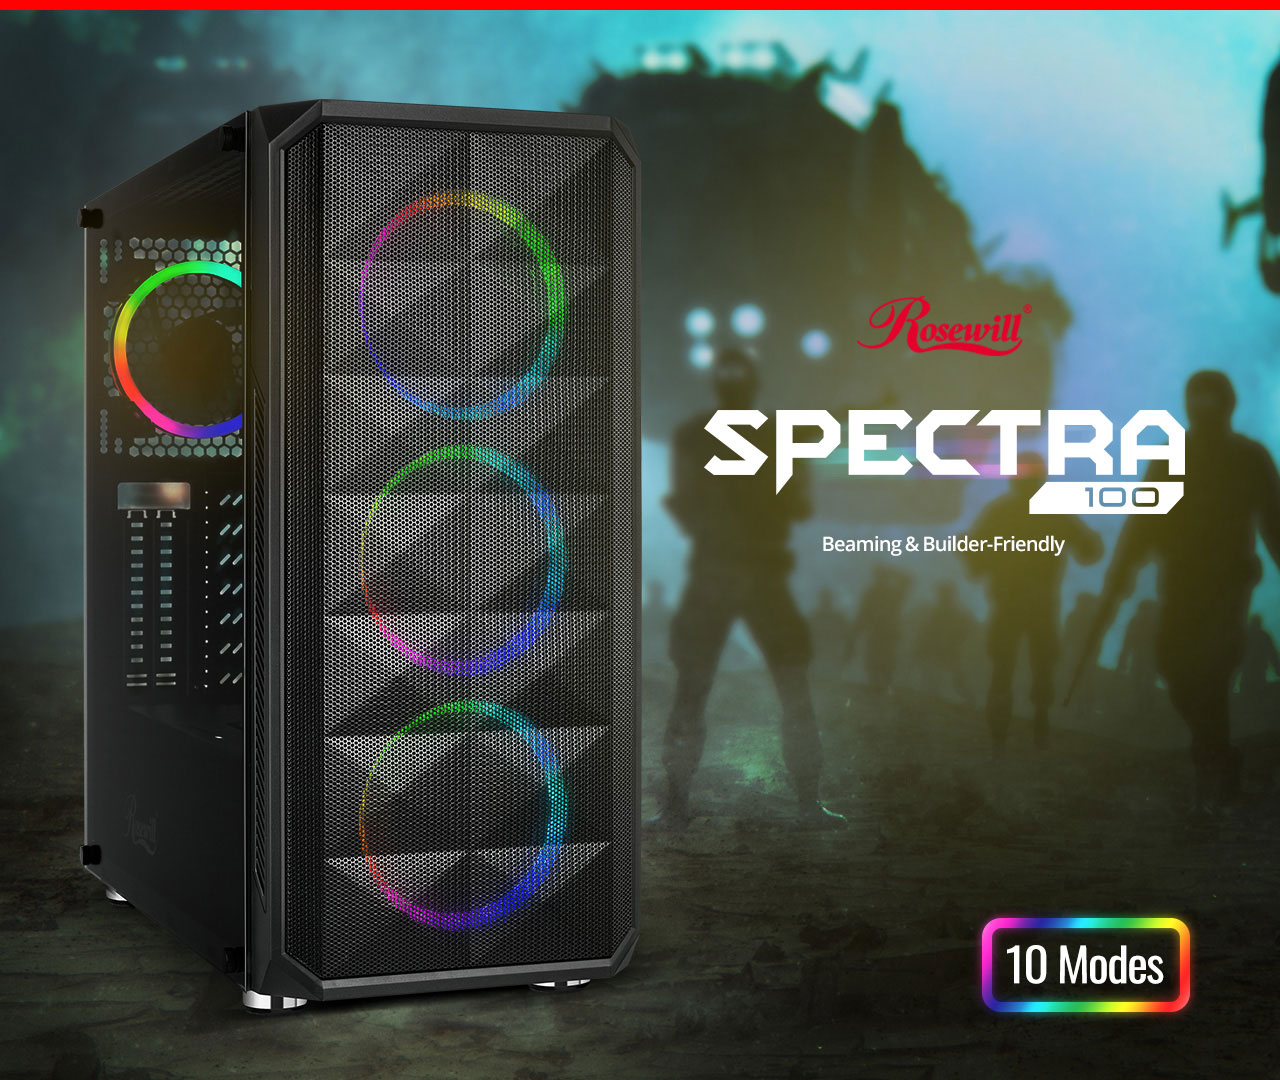 Rosewill SPECTRA D100 case angled to the right with four glowing rainbow RGB lights. Next to the case is text that reads Beaming & Builder-Friendly. Below the text is a 10 Modes RGB lighting effects graphic